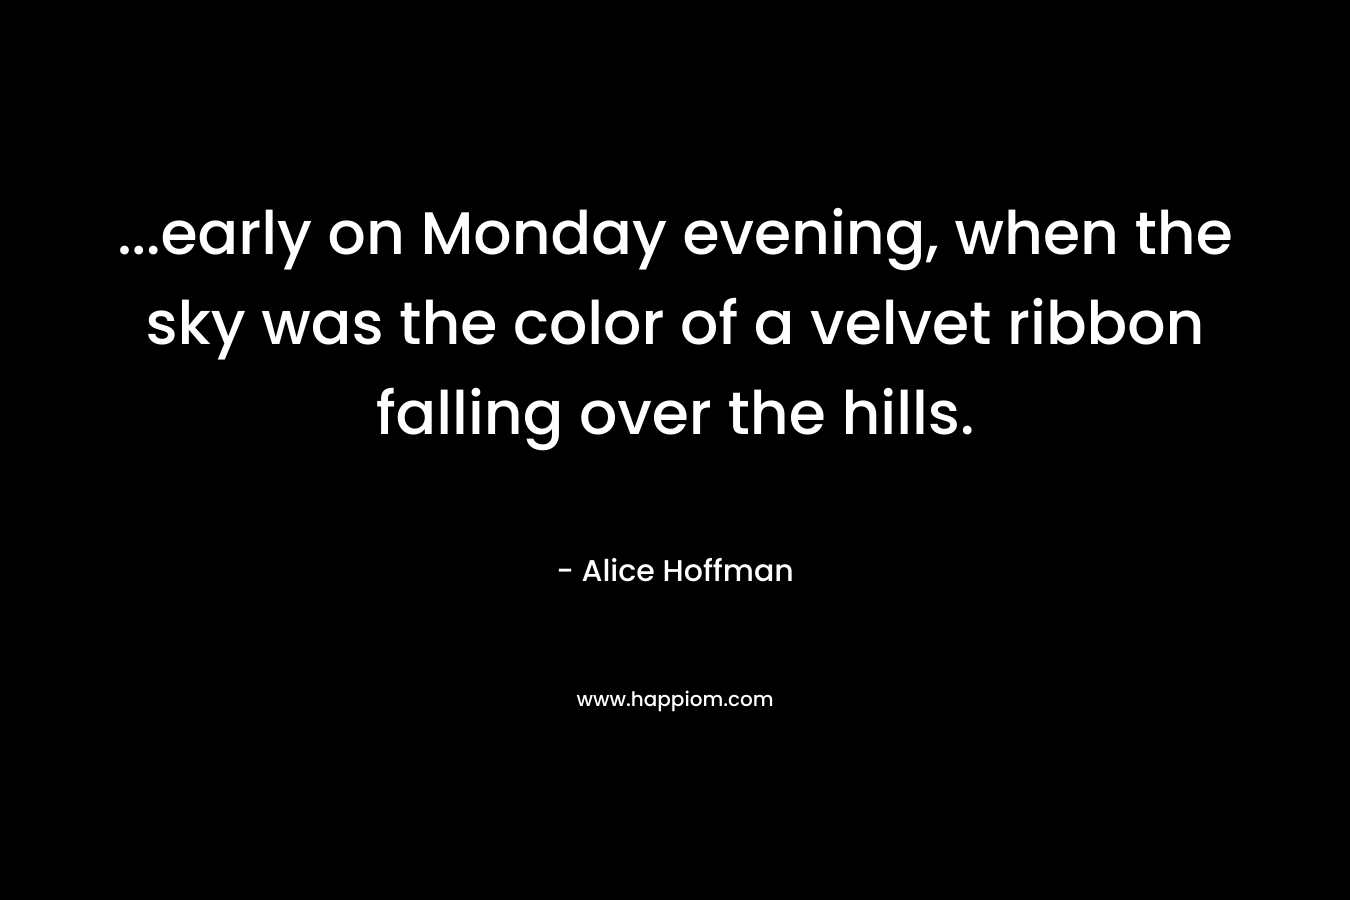 …early on Monday evening, when the sky was the color of a velvet ribbon falling over the hills. – Alice Hoffman